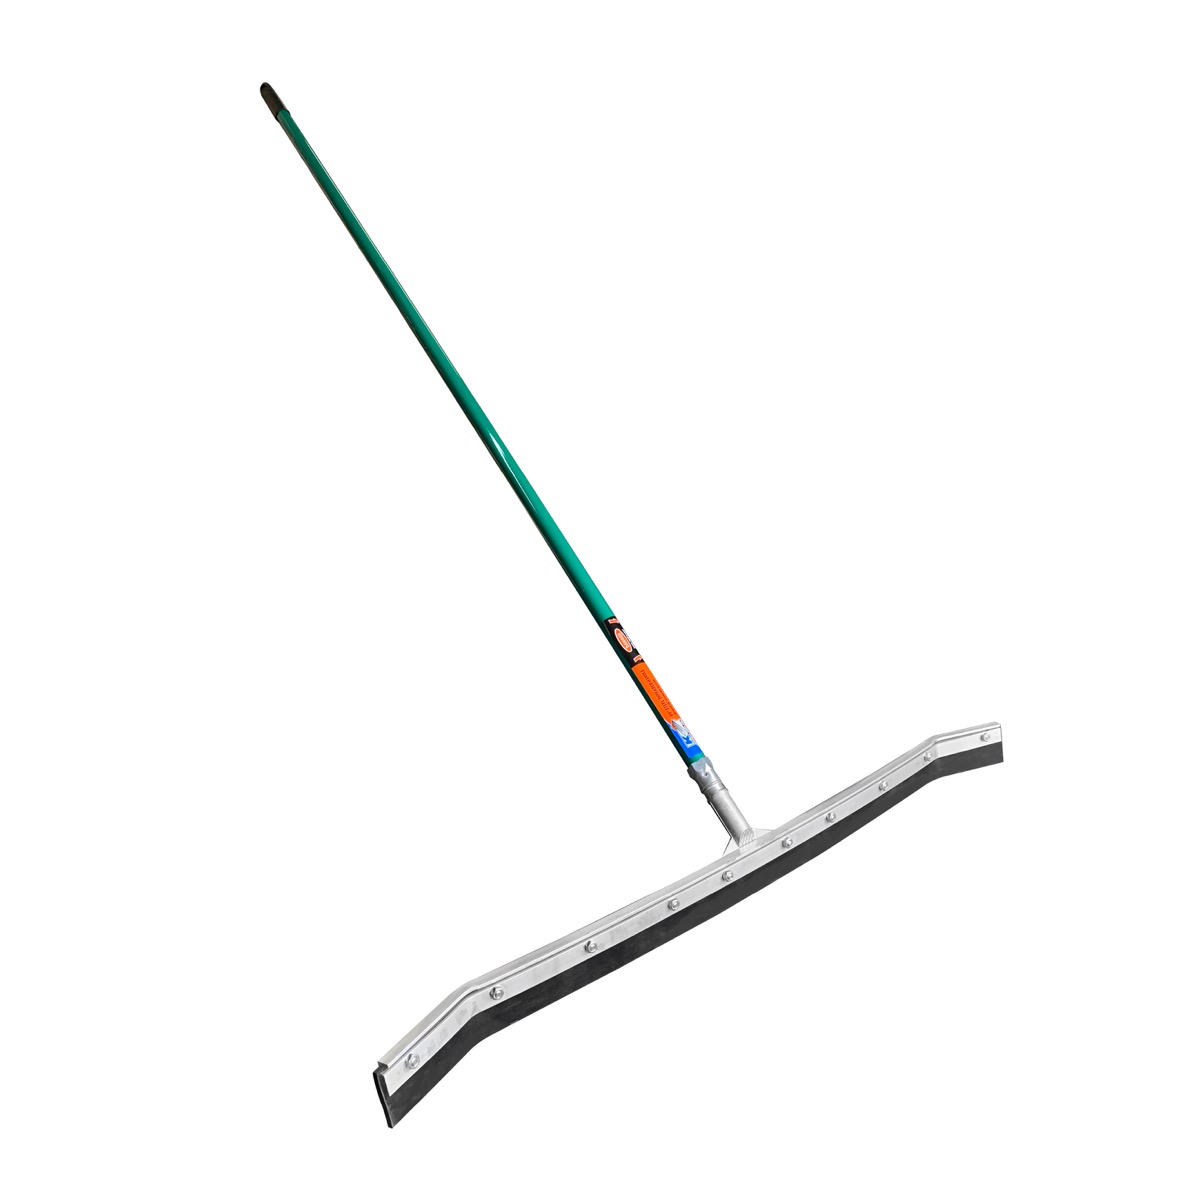 This Curved Edge Squeegee has a 36" / 900mm head size and is used to move fluid to the desired location on floors. Popular with concrete grinding and polishing specialists for applying coating stages. Available from Speedcrete, United Kingdom.